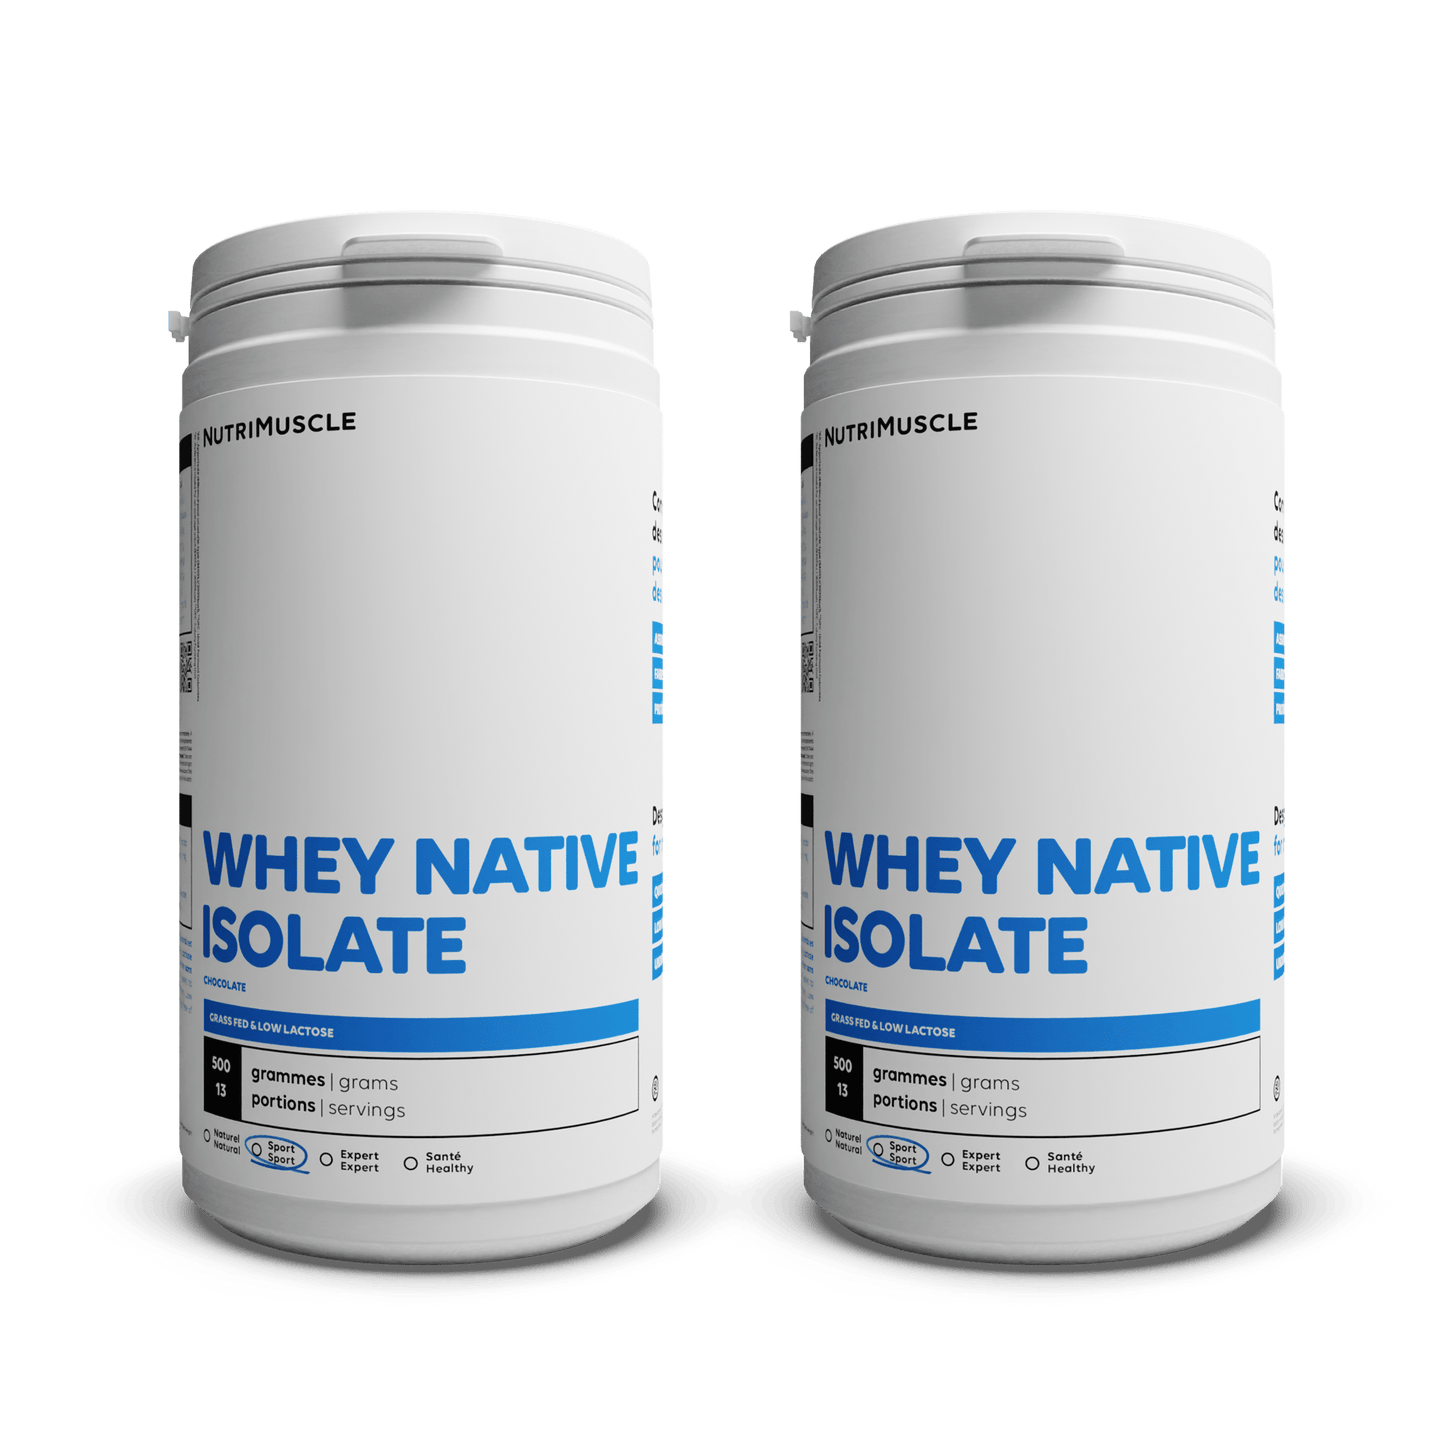 Nutrimuscle Protéines Chocolat / 1.00 kg Whey Native Isolate (Low lactose)